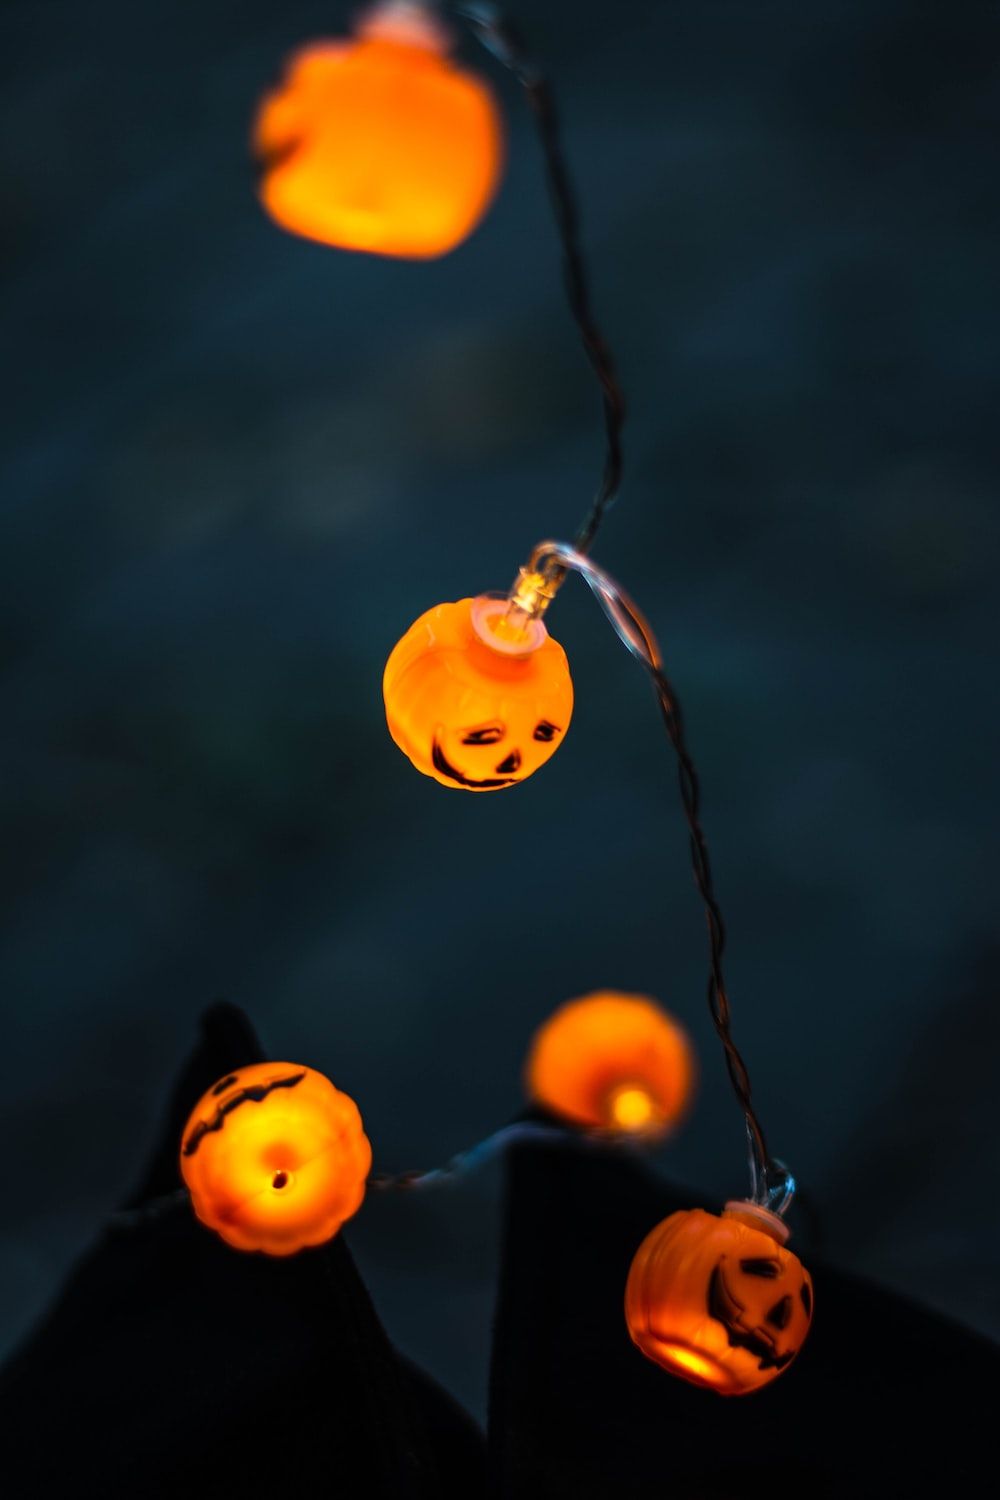 String lights in the shape of pumpkins with faces on them - Halloween, cute Halloween, spooky